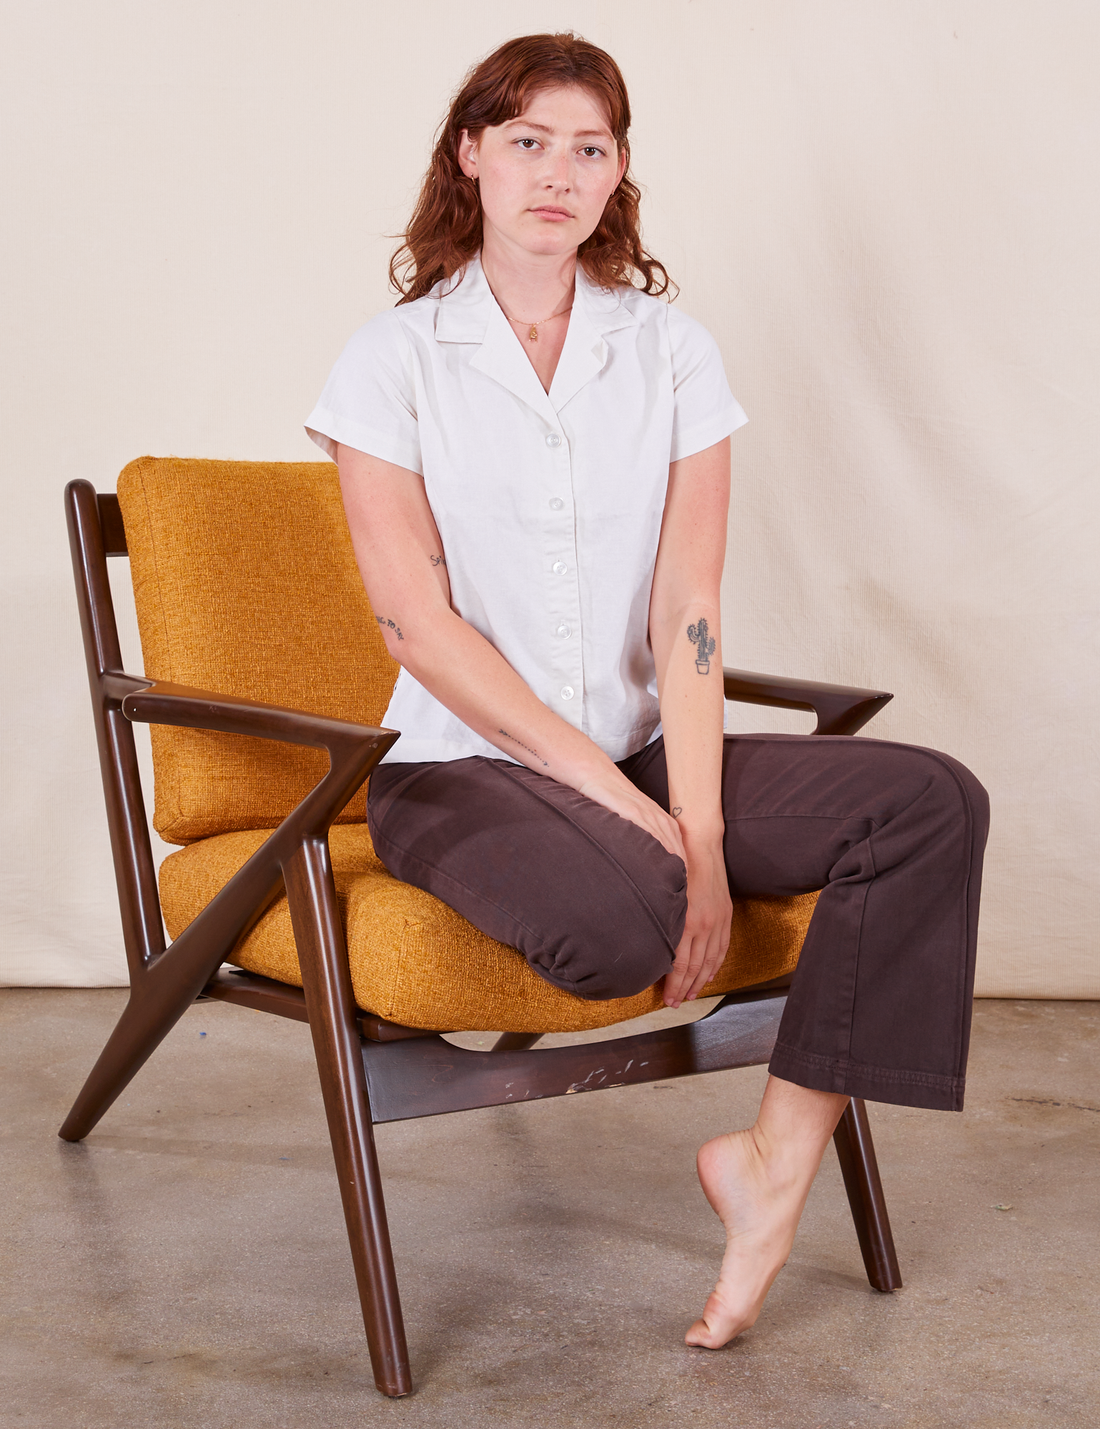 Alex is wearing Pantry Button-Up in Vintage Tee White and espresso brown Western Pants